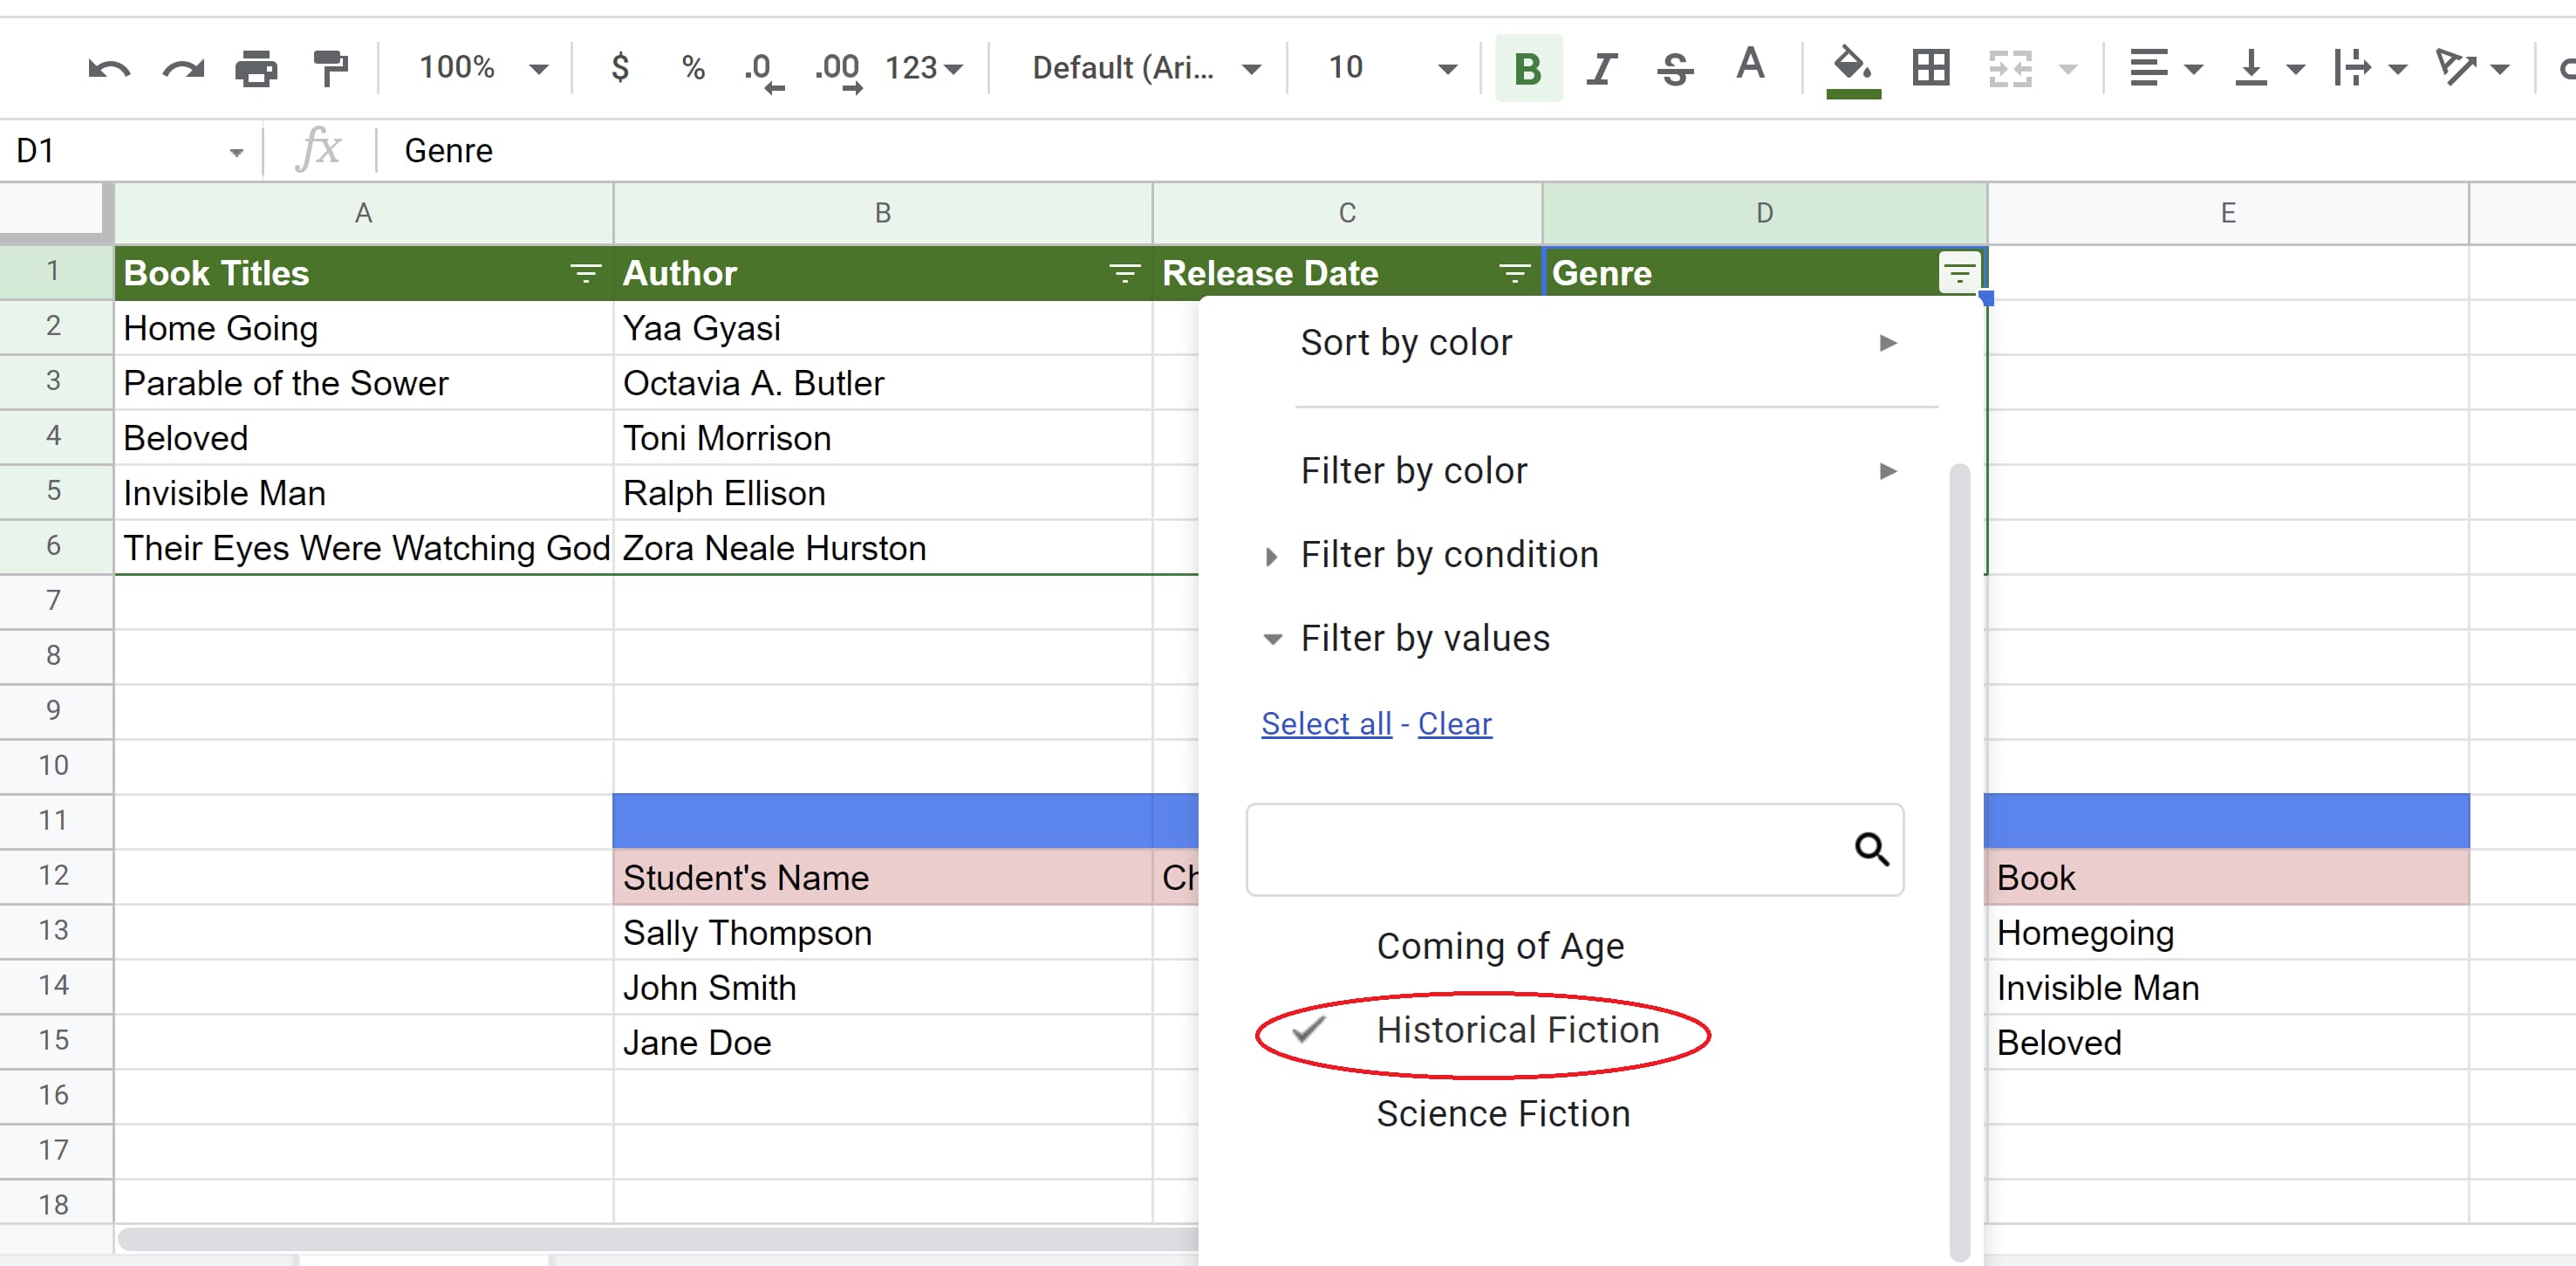 The value of Historical Fiction data is selected while the other values ​​are deselected in Google Spreadsheets